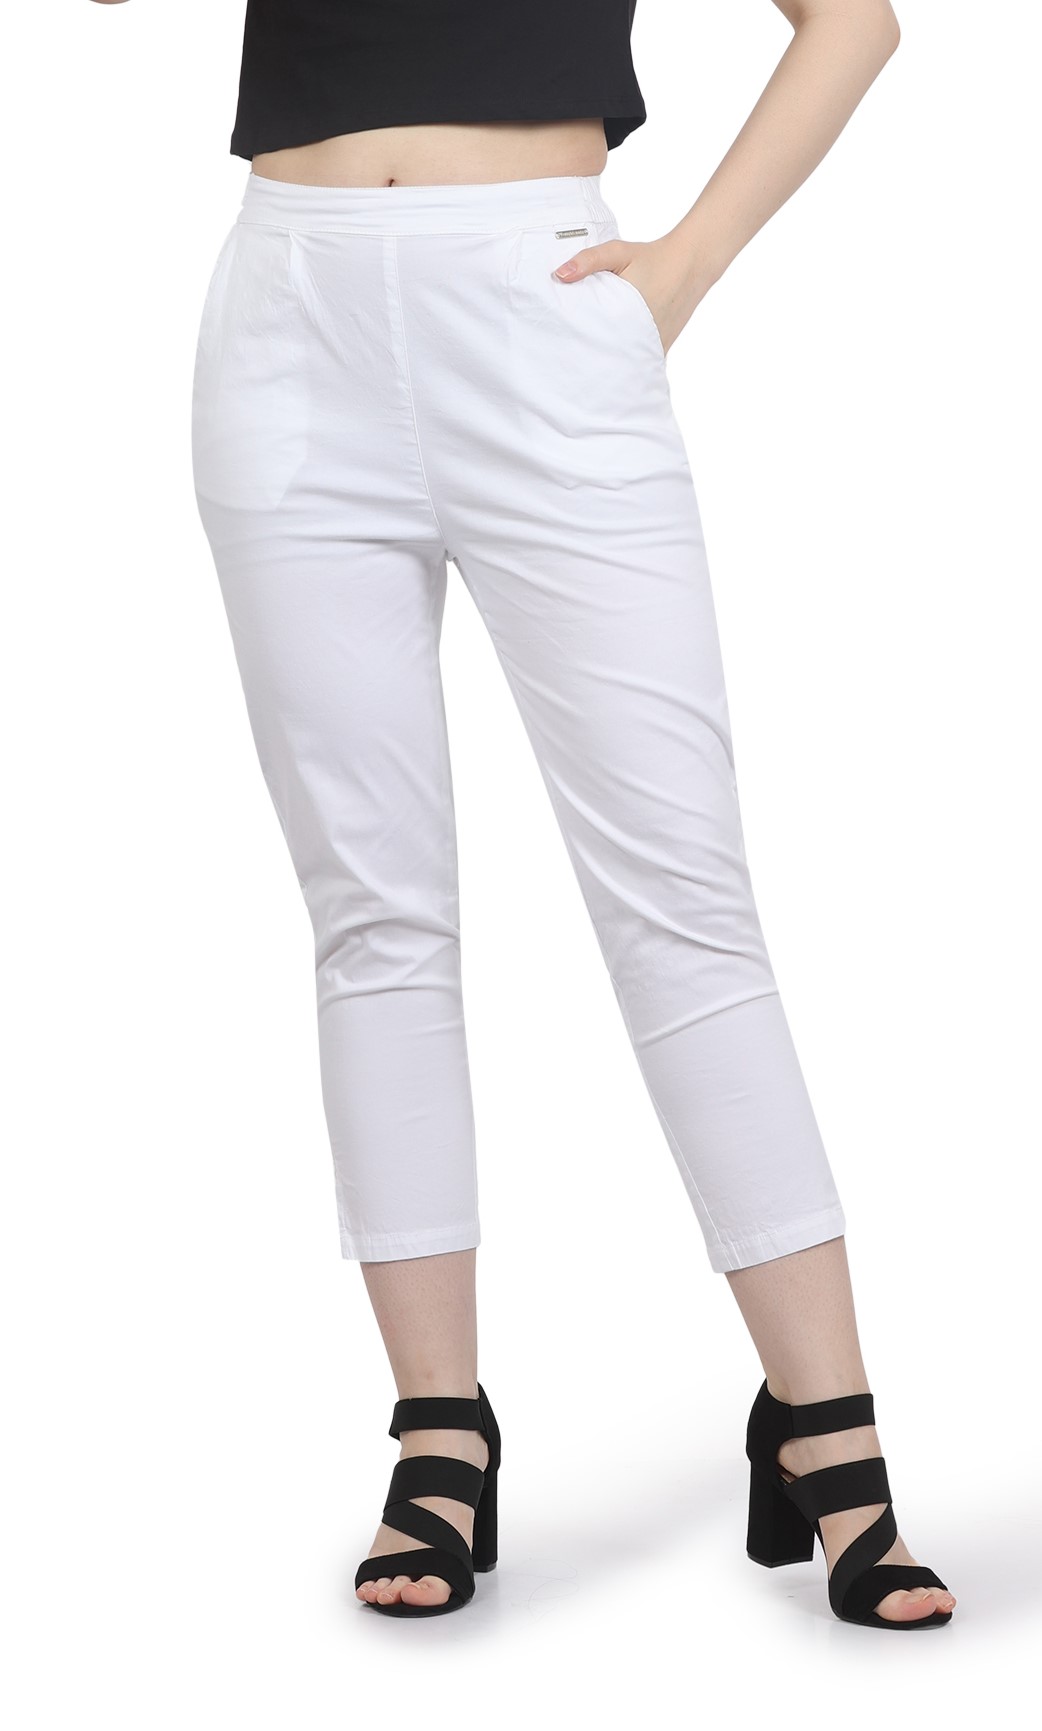 https://frenchtrendz.com/images/thumbs/0007661_frenchtrendz-womens-ankle-length-front-belt-and-back-elasticated-poplin-lycra-white-pant.jpeg